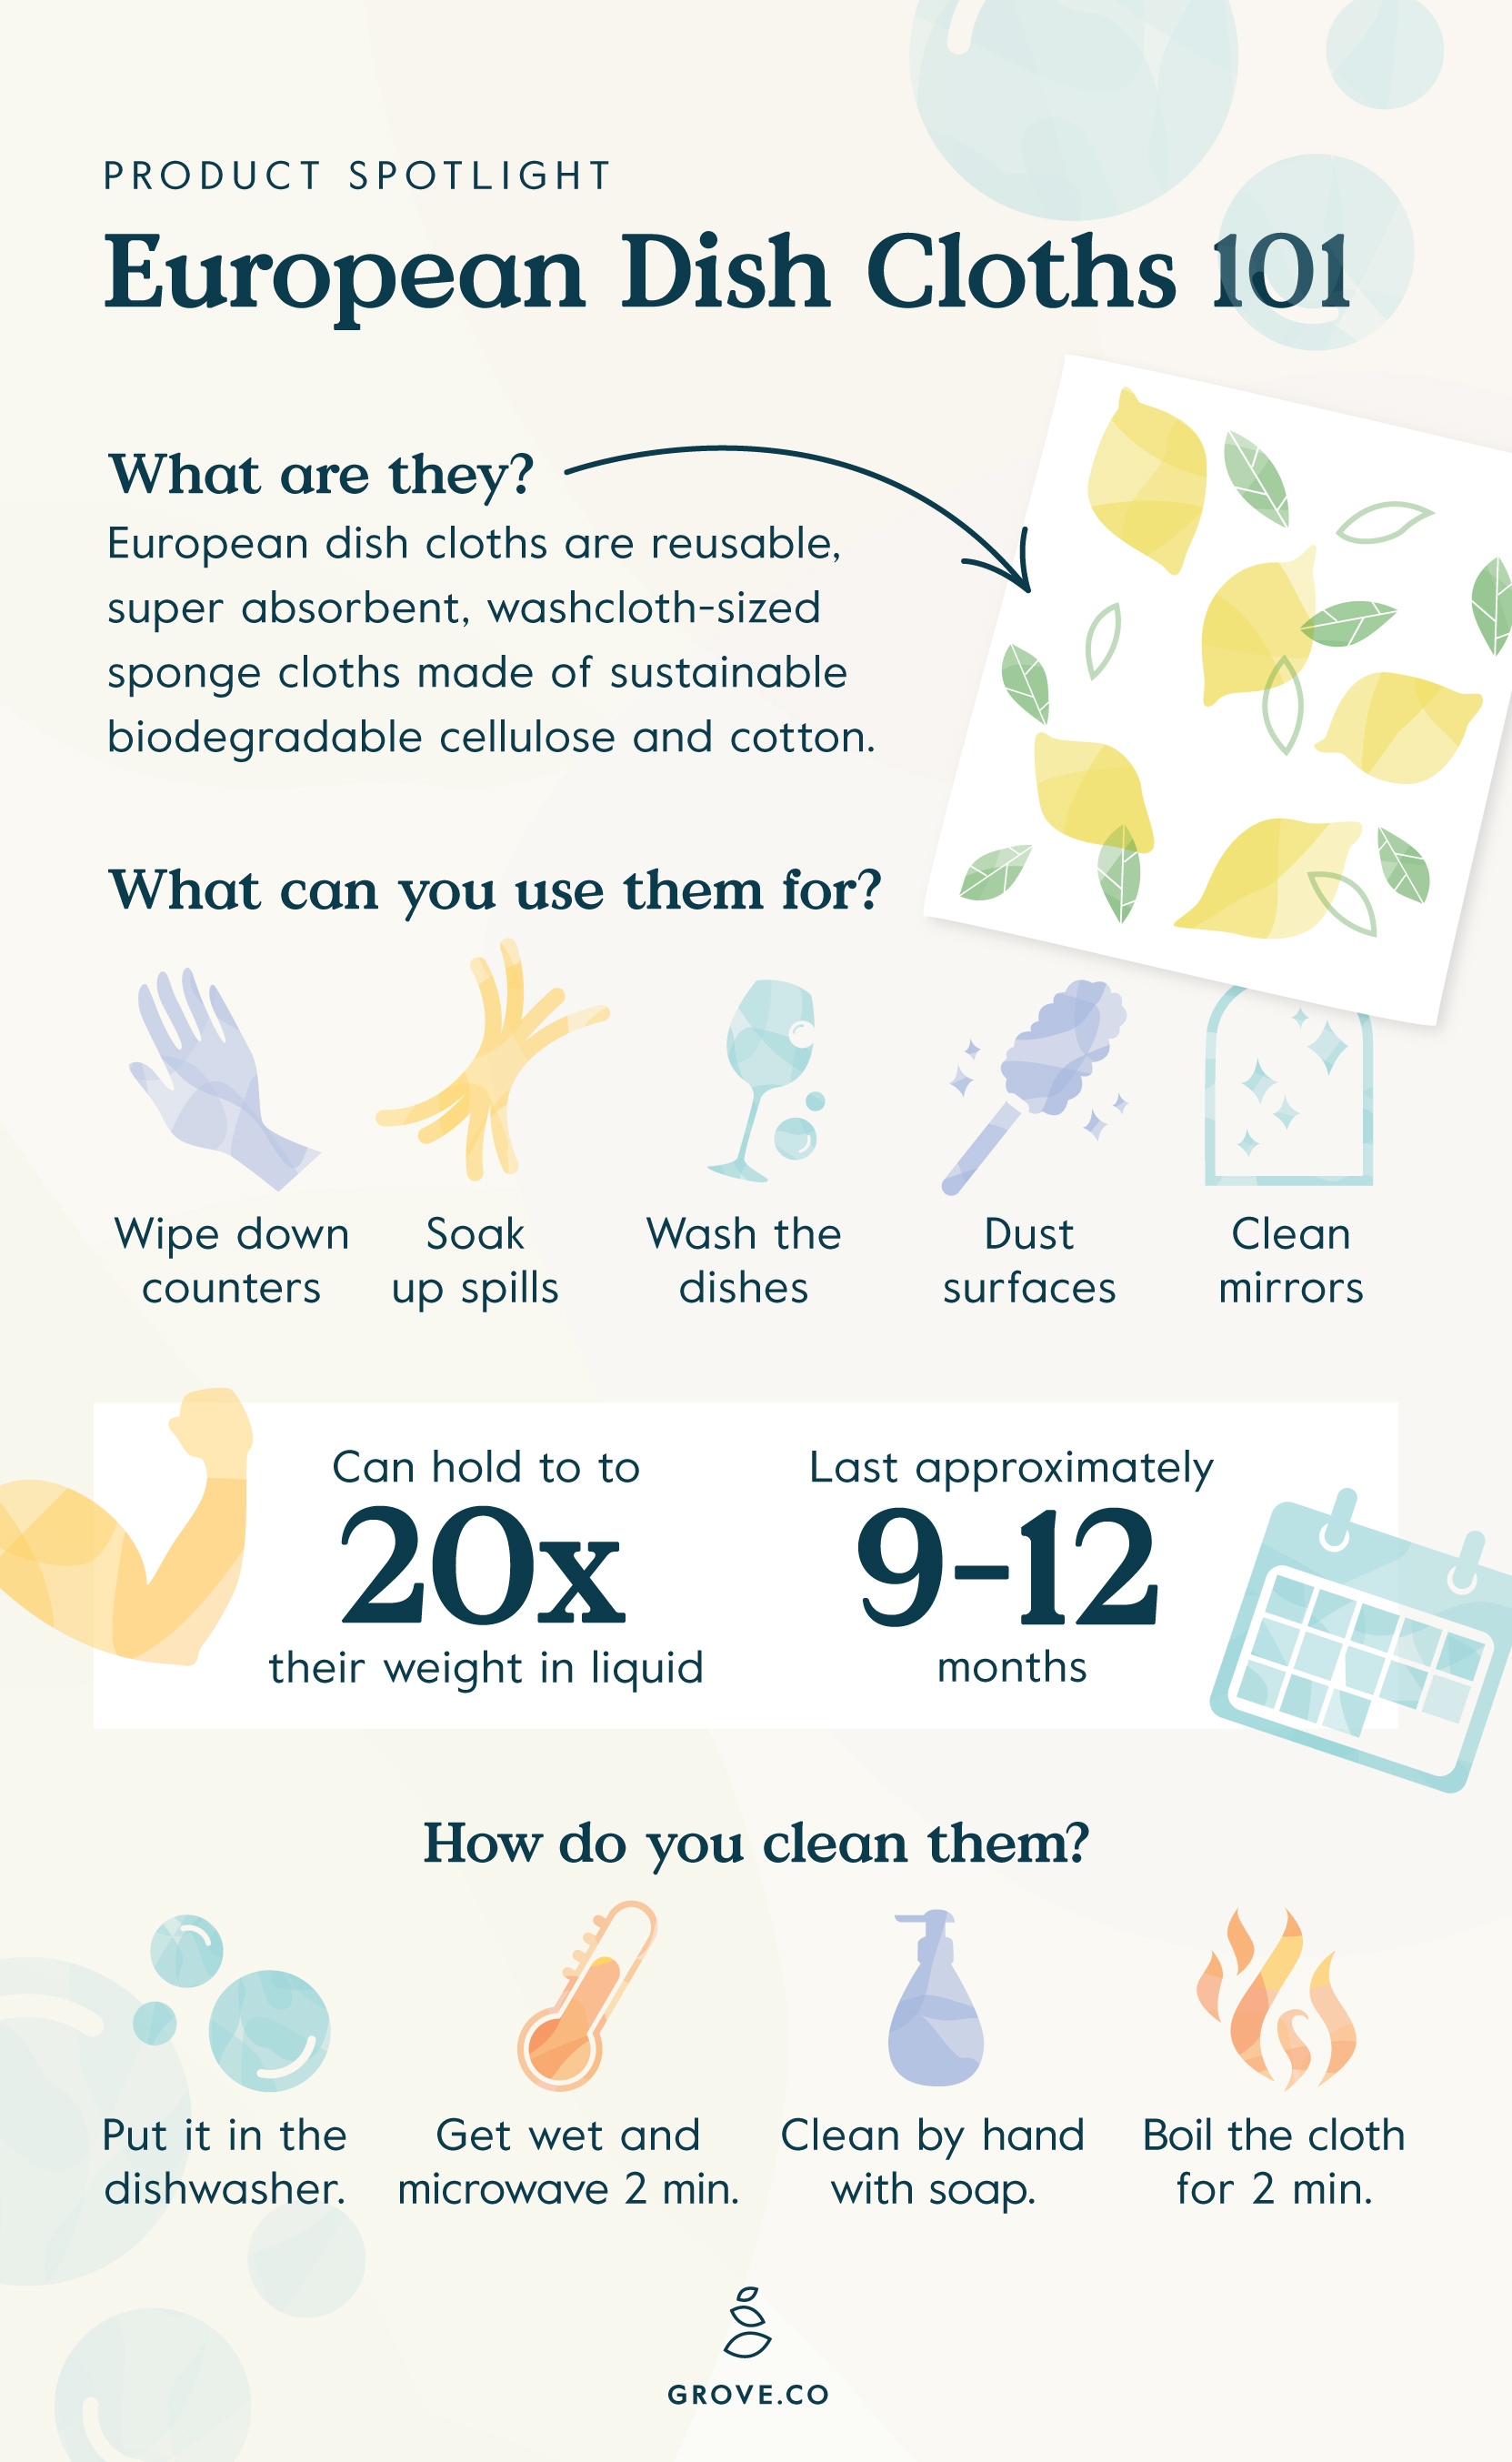 We Tried It: 5 Ways To Use European Dish Cloths